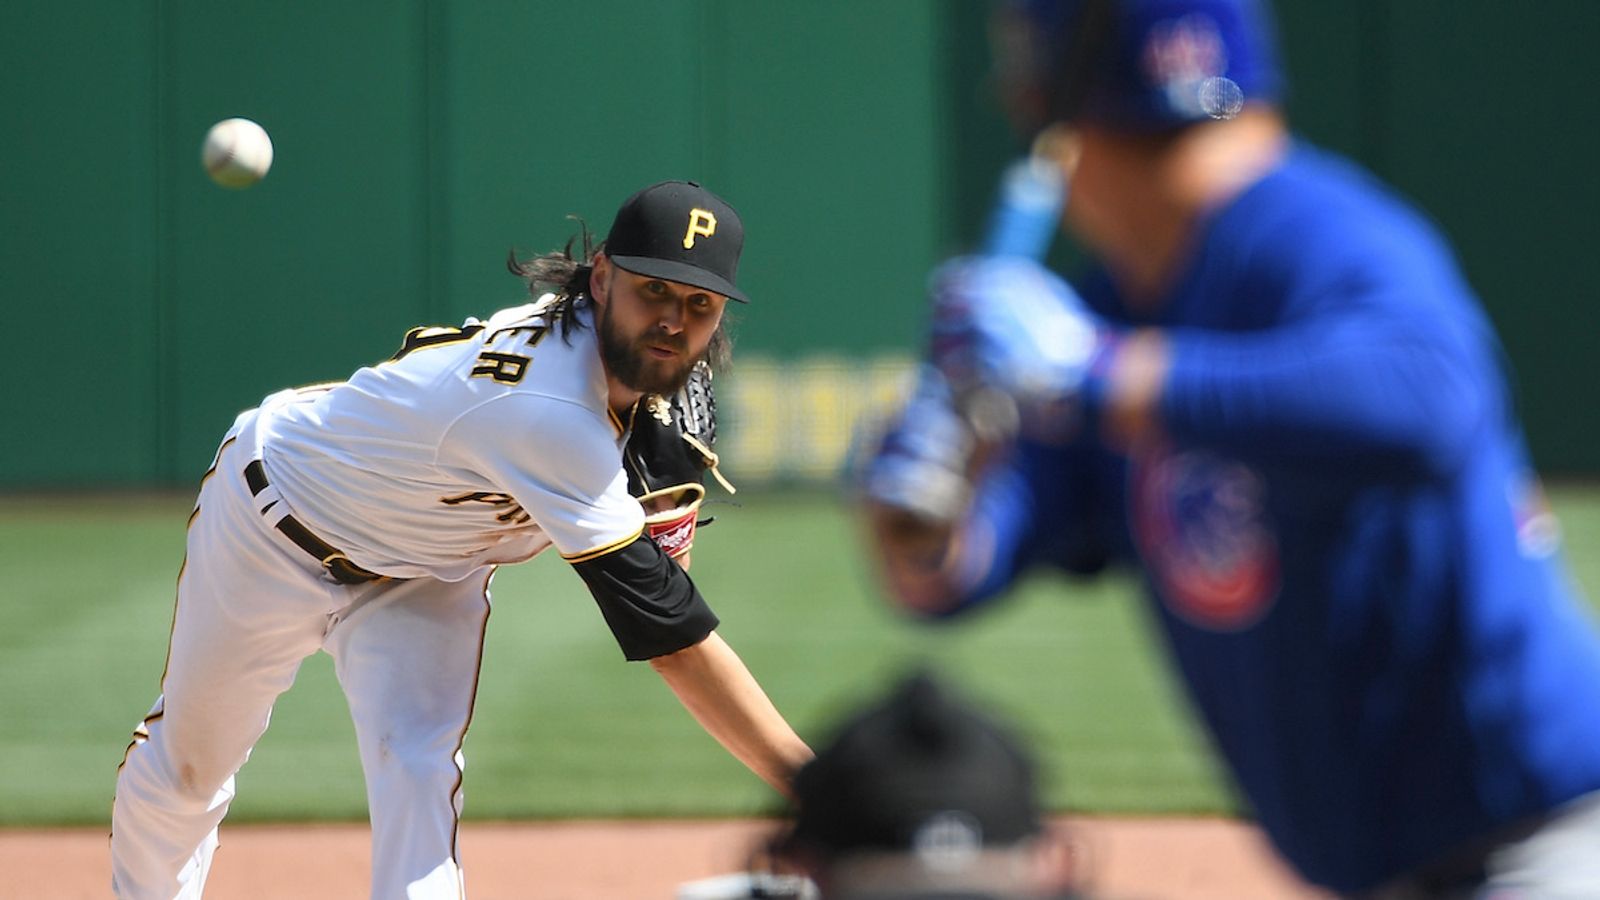 VOTE: Is early-season start sustainable for Pirates? - Bucs Dugout